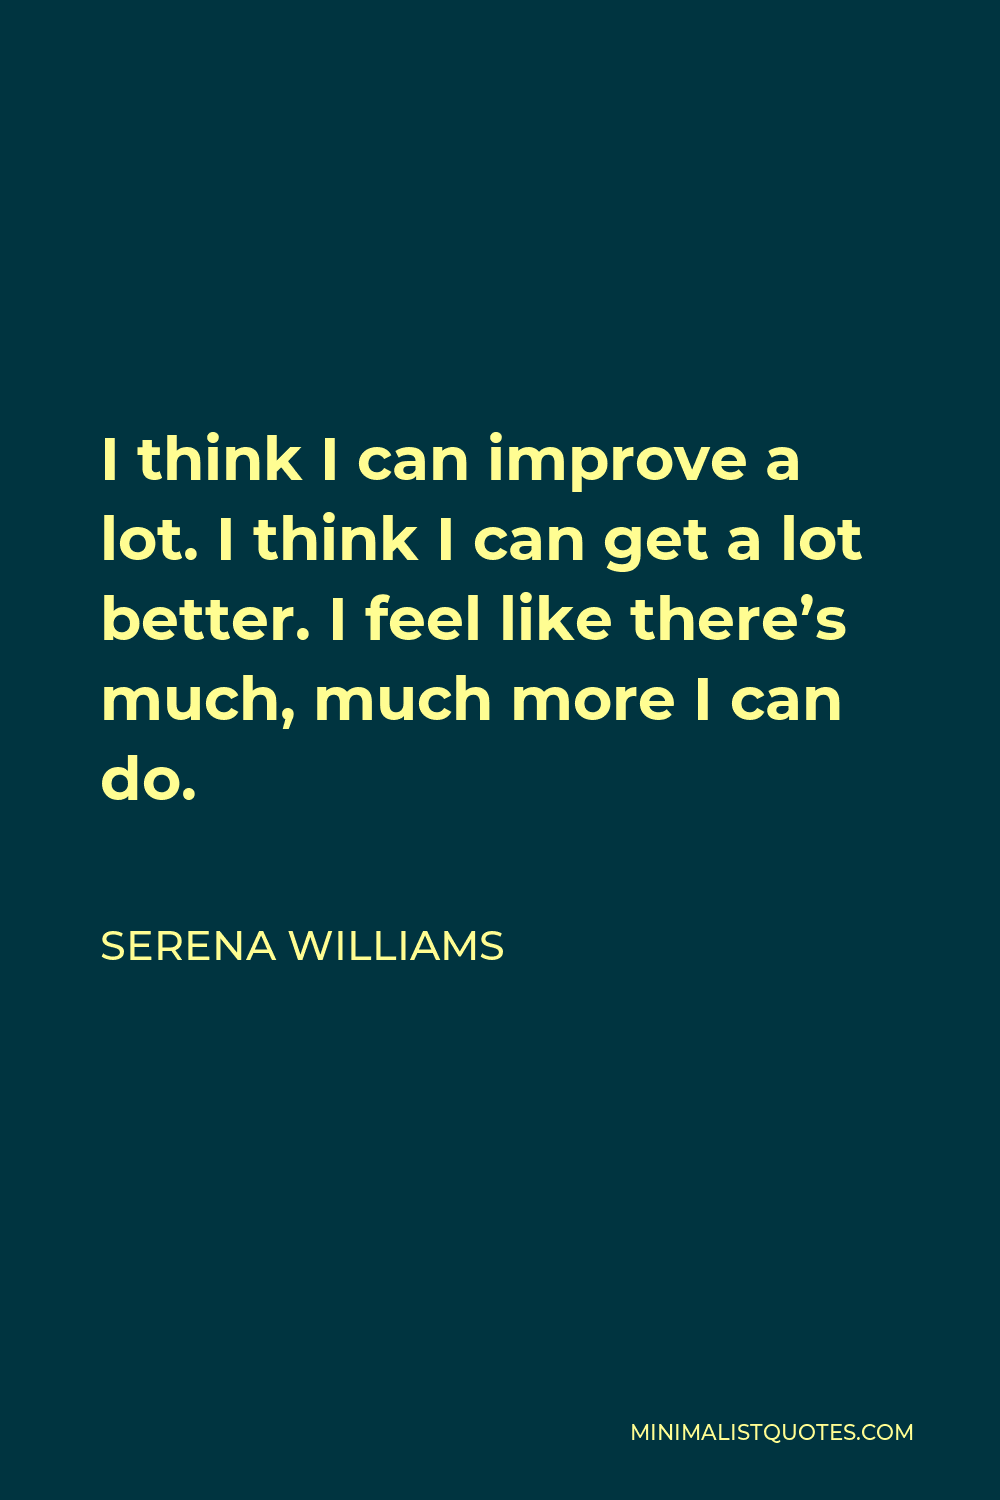 Serena Williams Quote - I think I can improve a lot. I think I can get a lot better. I feel like there’s much, much more I can do.